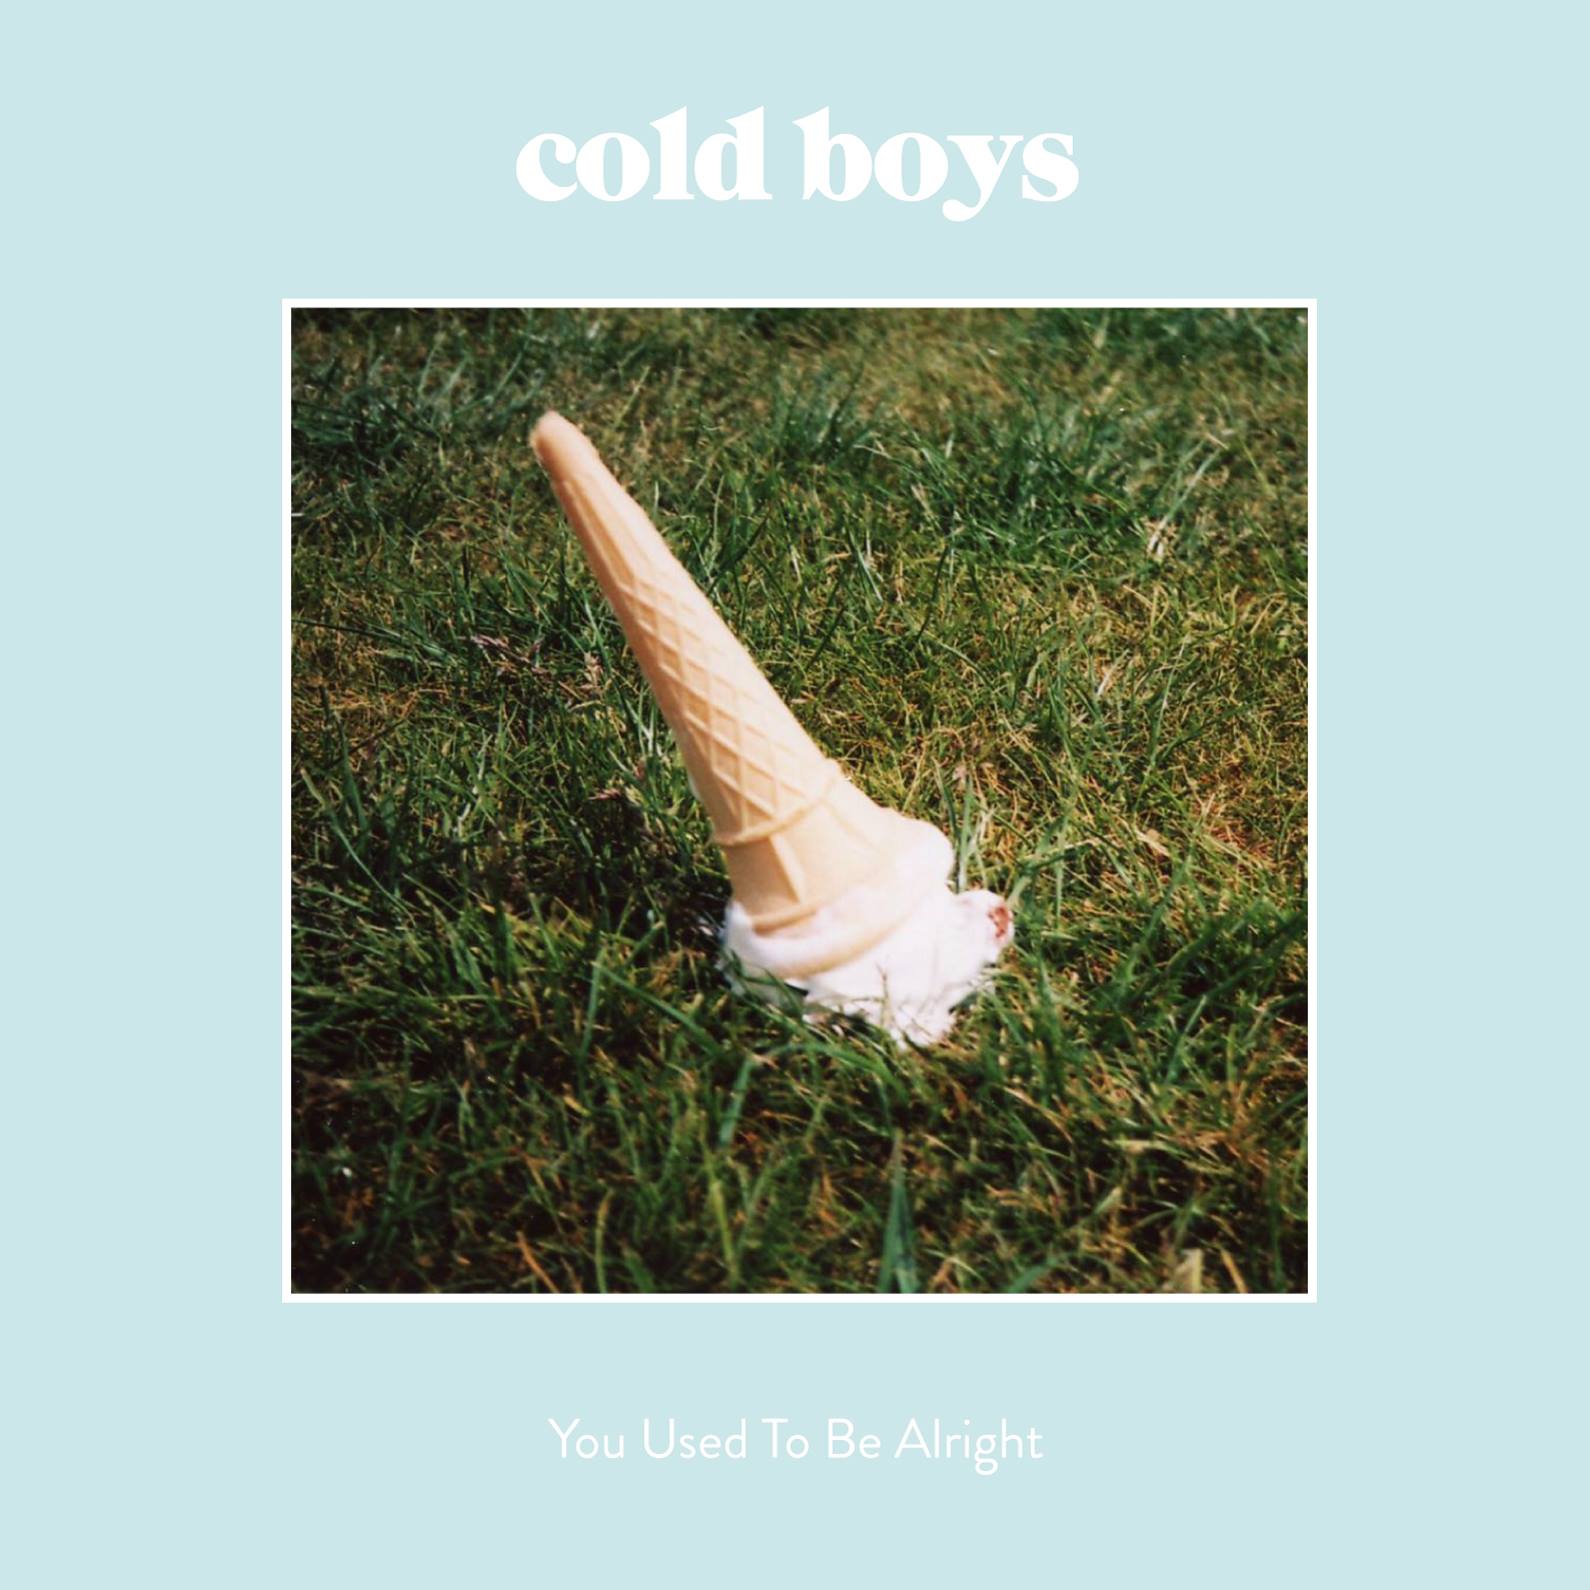 Cold Boys – “You Used To Be Alright”